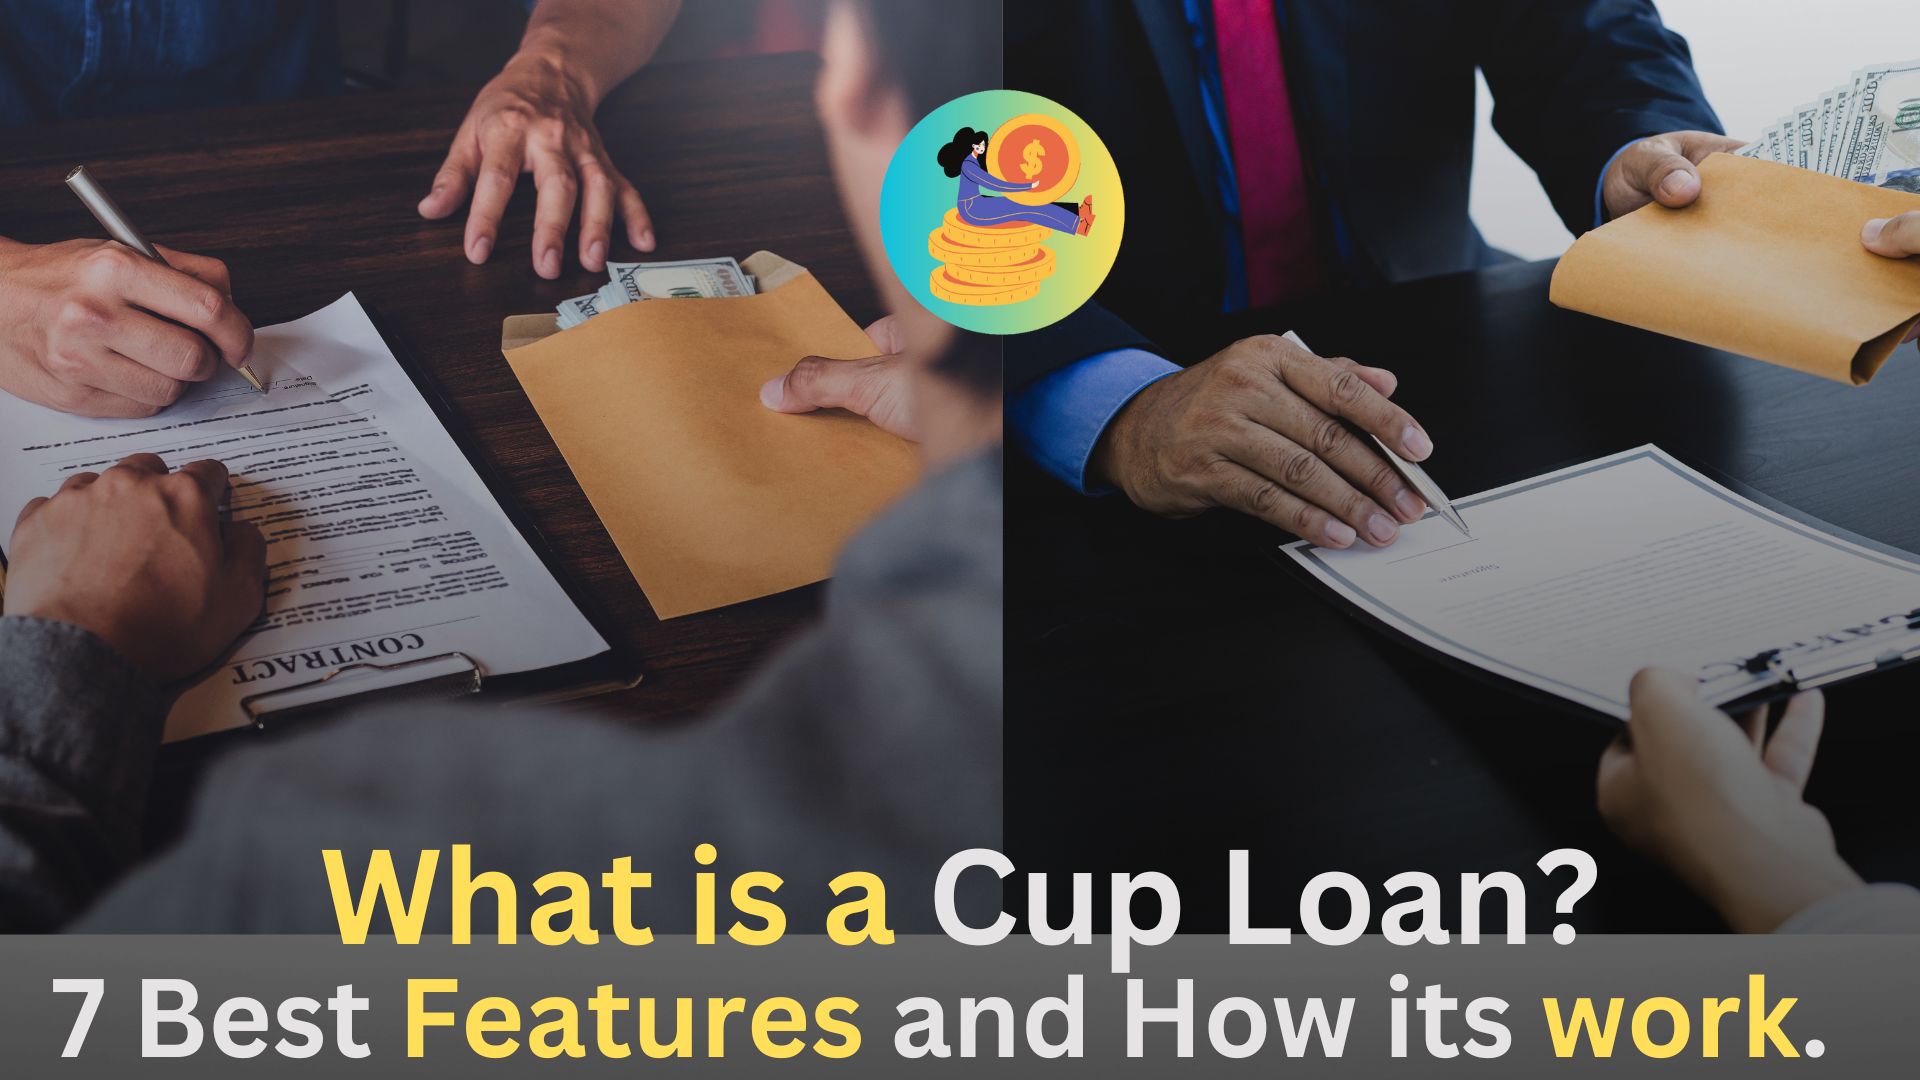 What is a Cup Loan,7 Best Features and How its work.